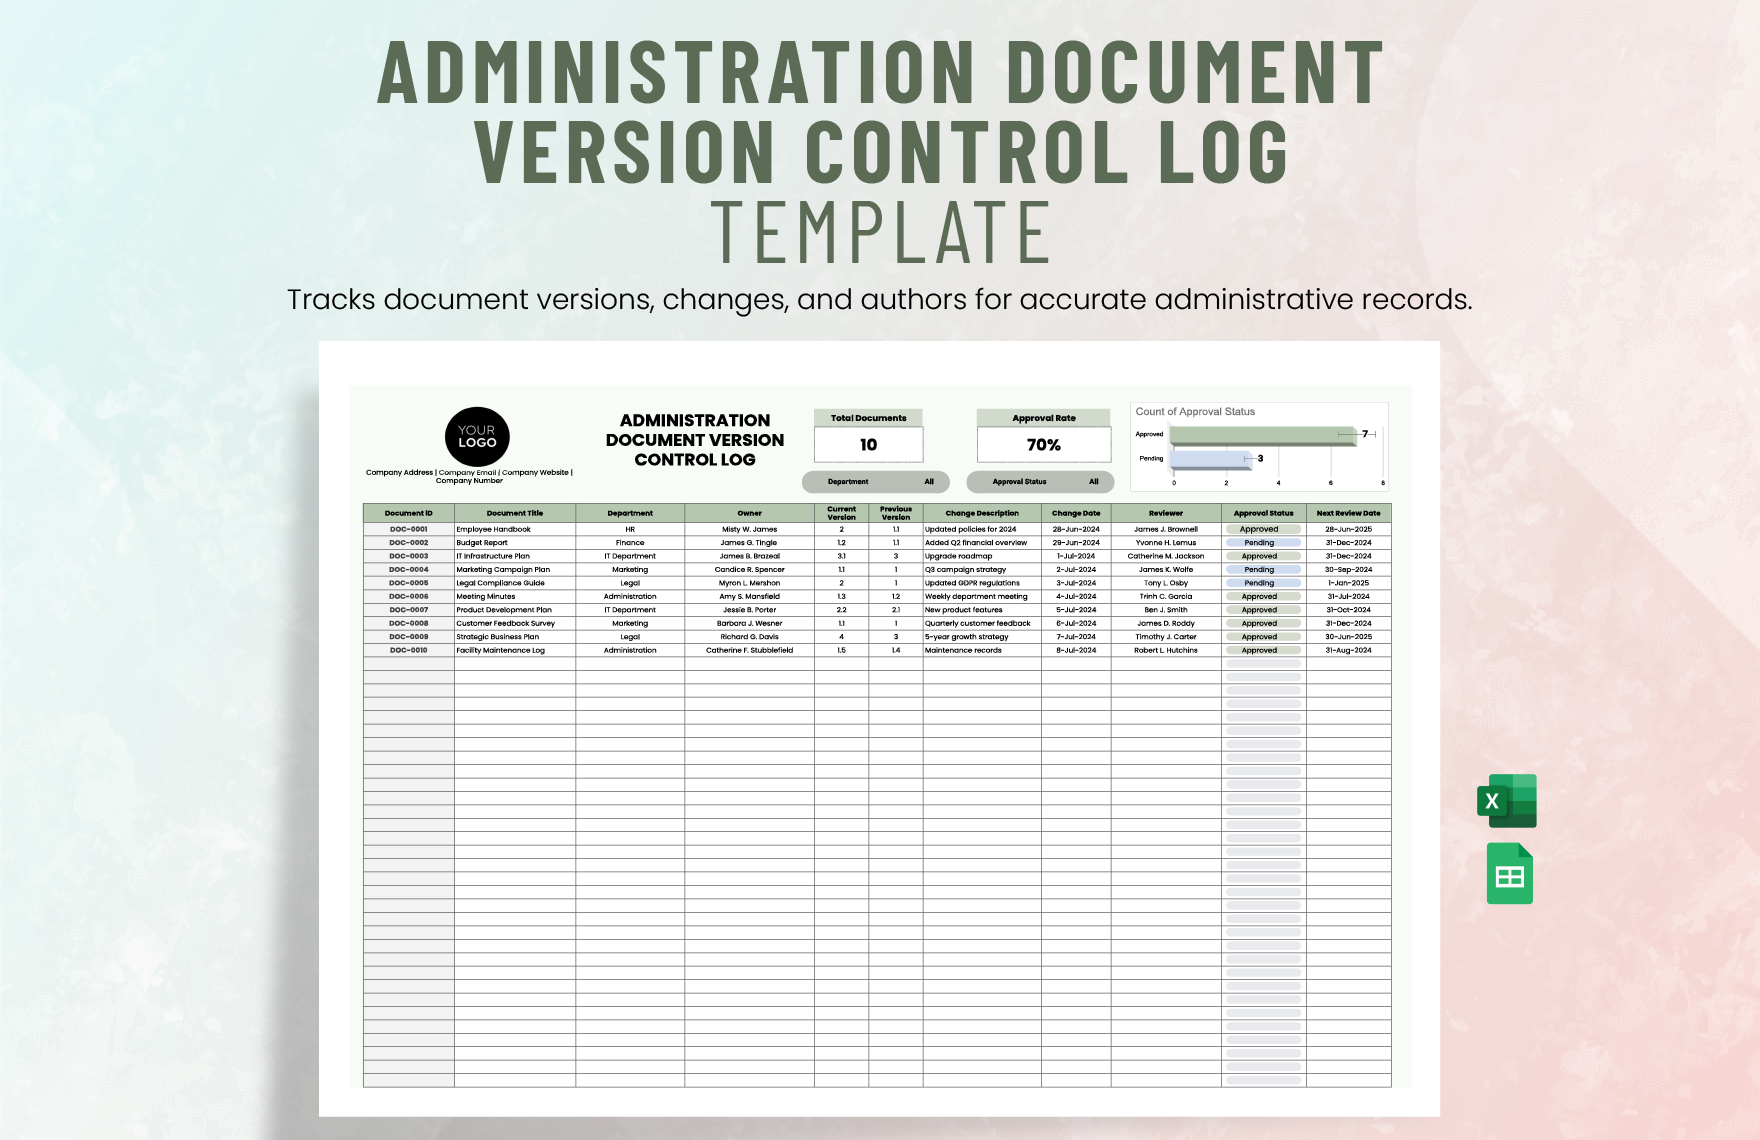 Administration Document Version Control Log Template in Excel, Google Sheets